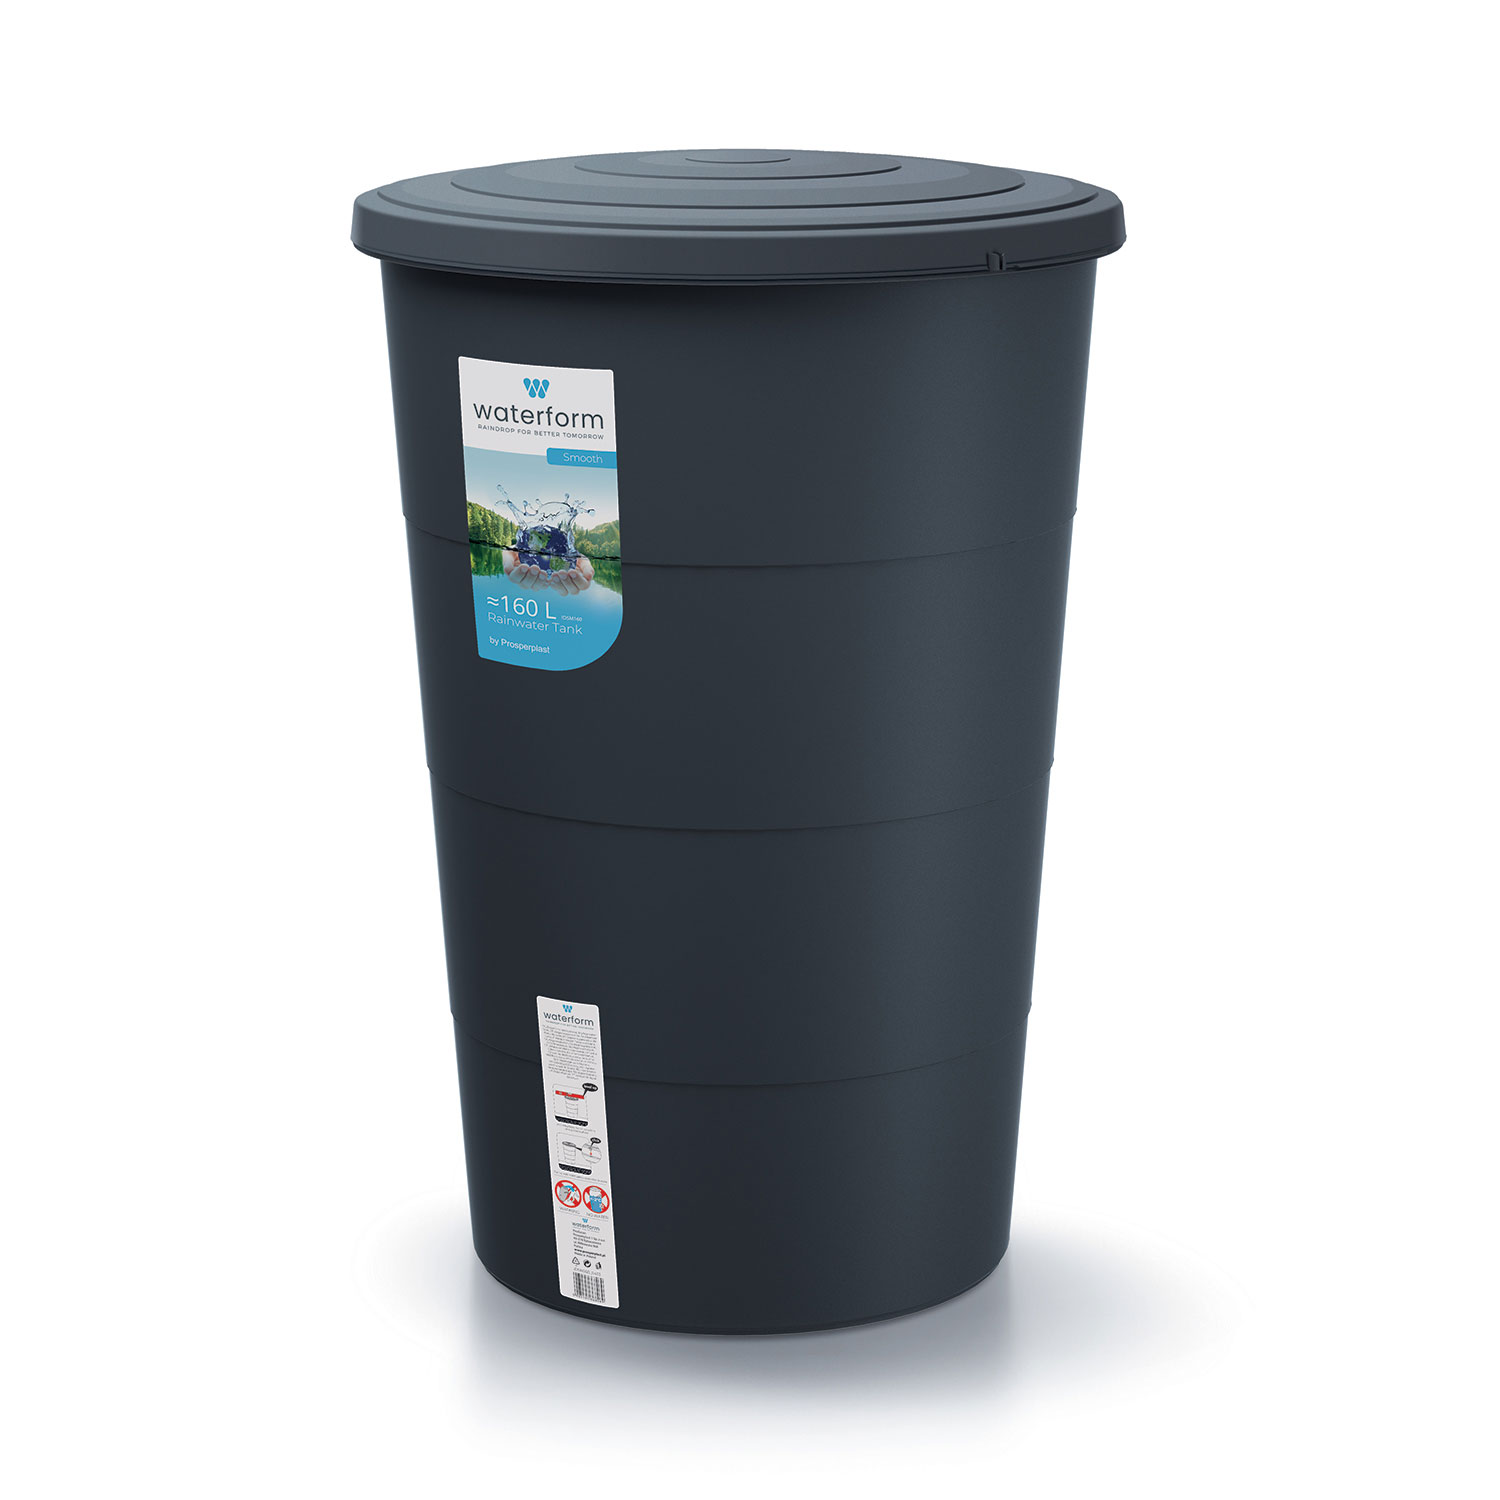 Waterform Smooth rainwater tank IDSM160 Anthracite